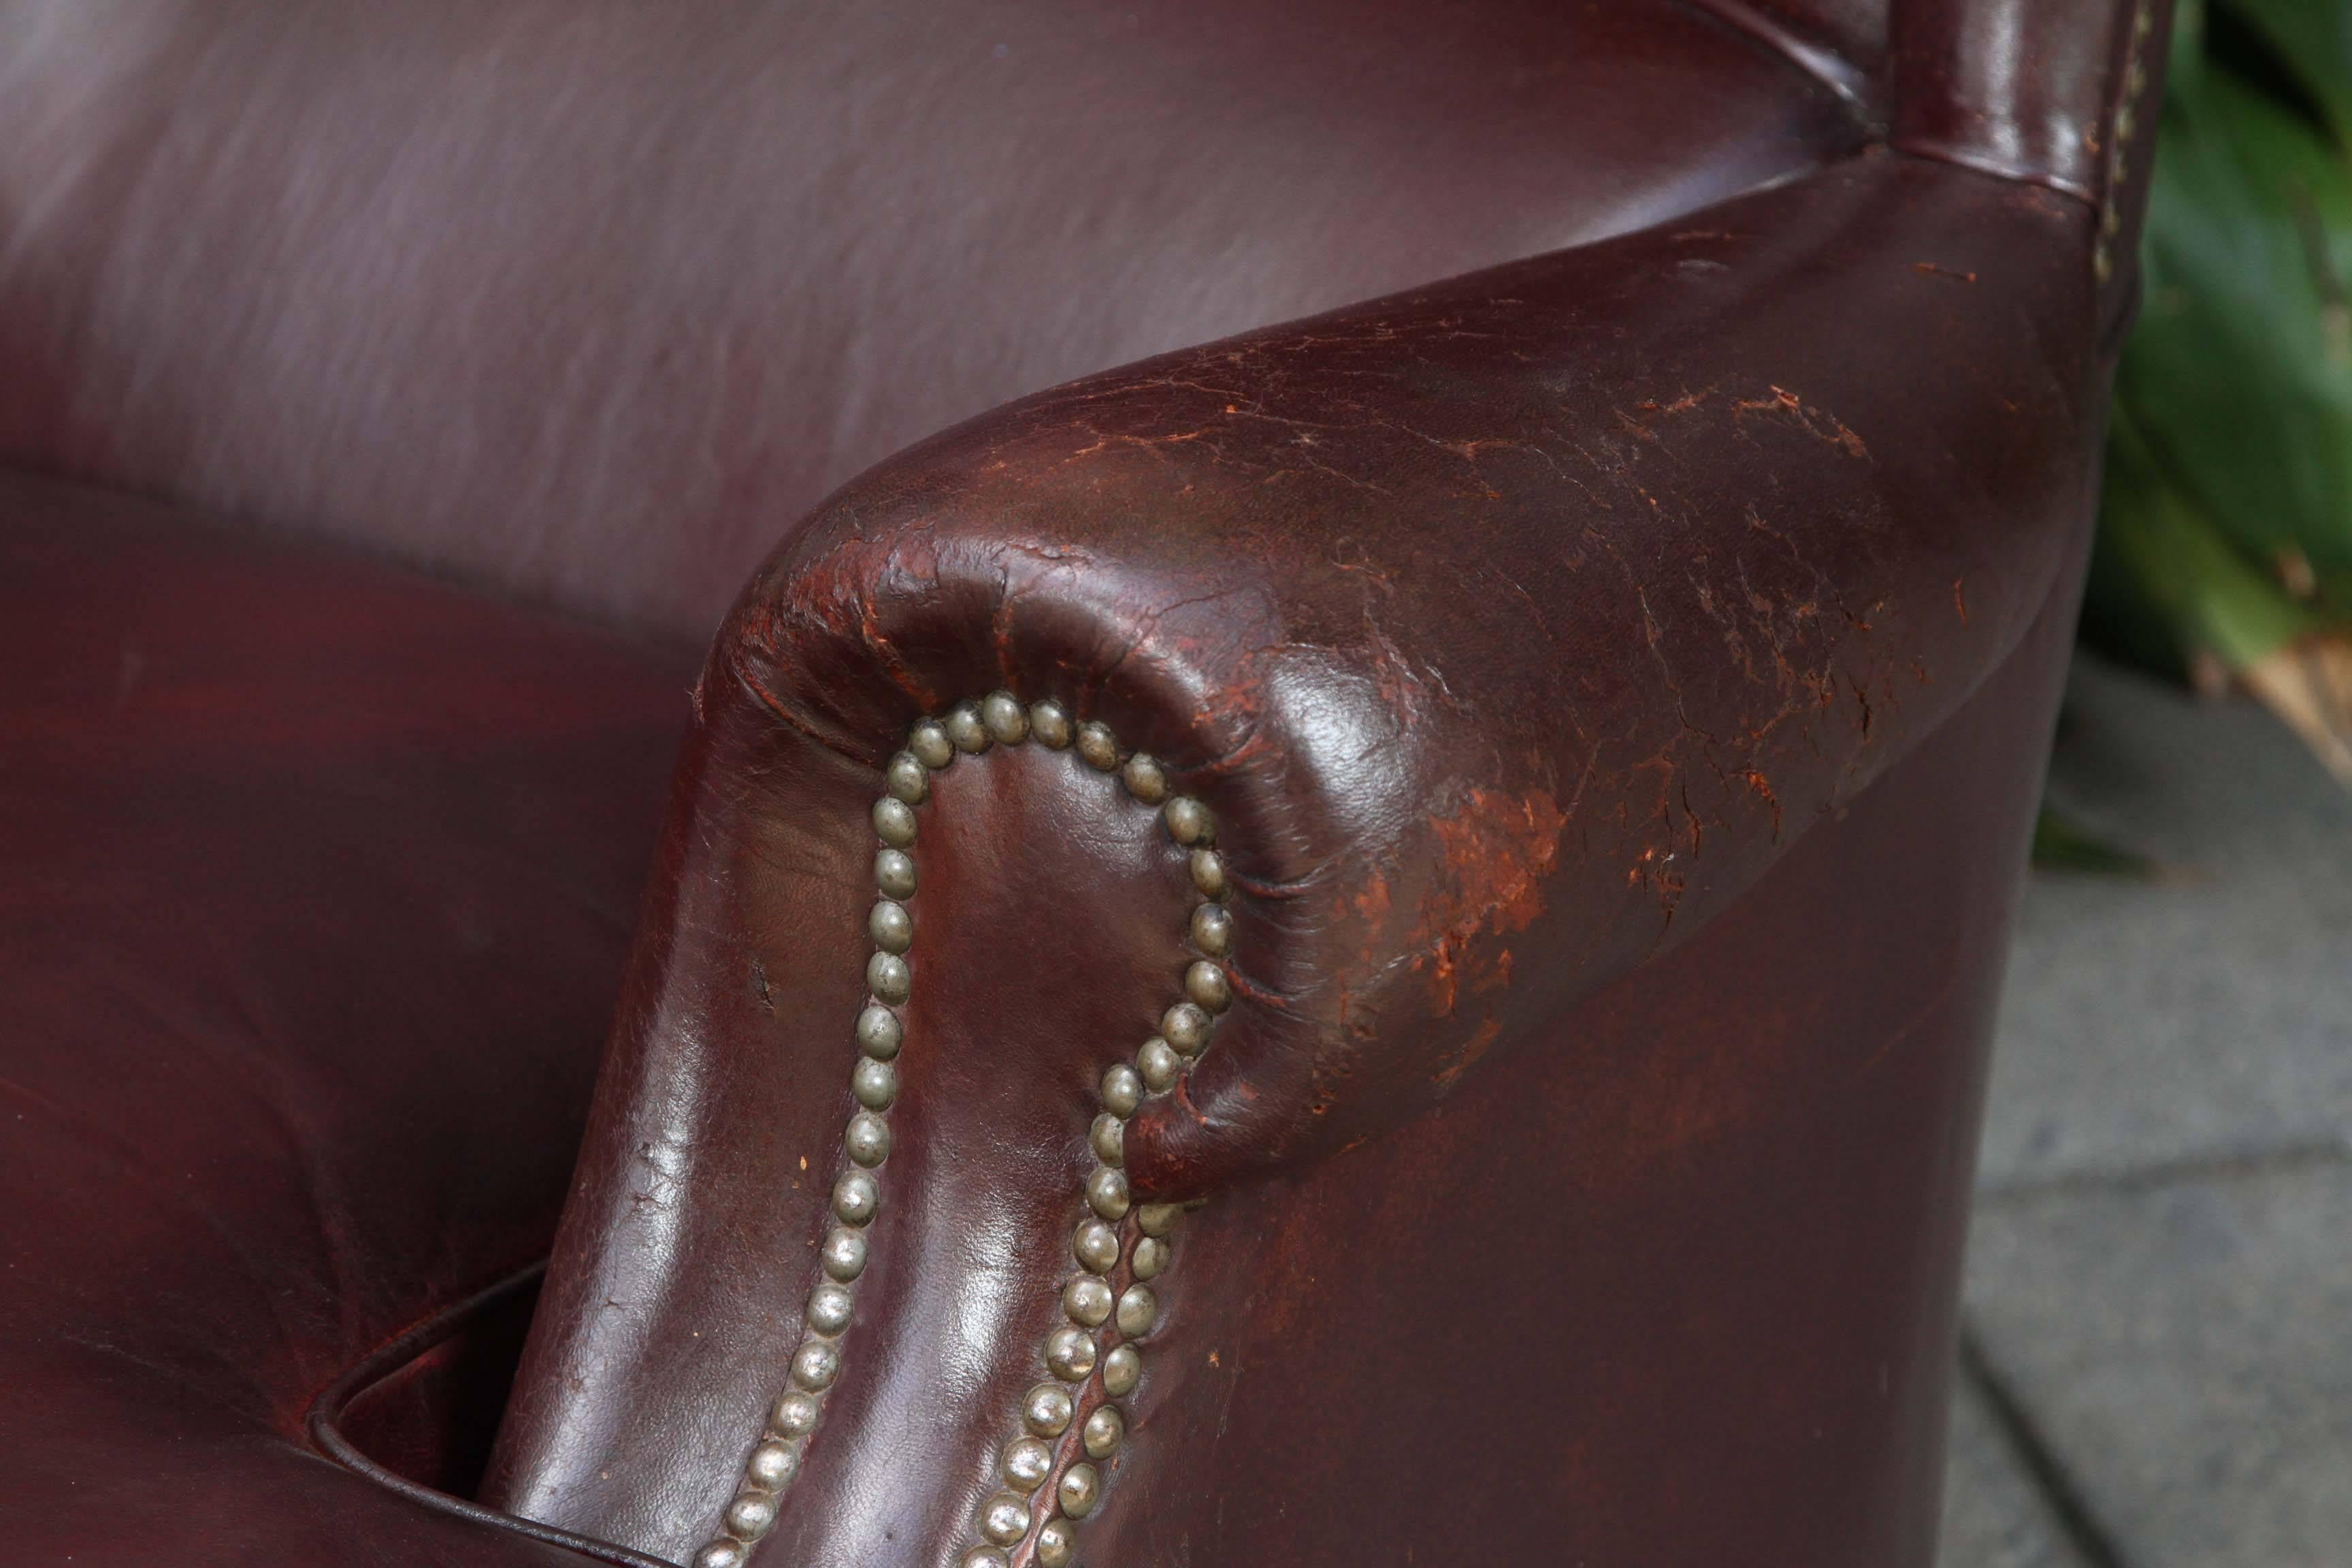 A late 19th century Italian later wingback chair on castors. The leather is a rich plum color with nice patina.